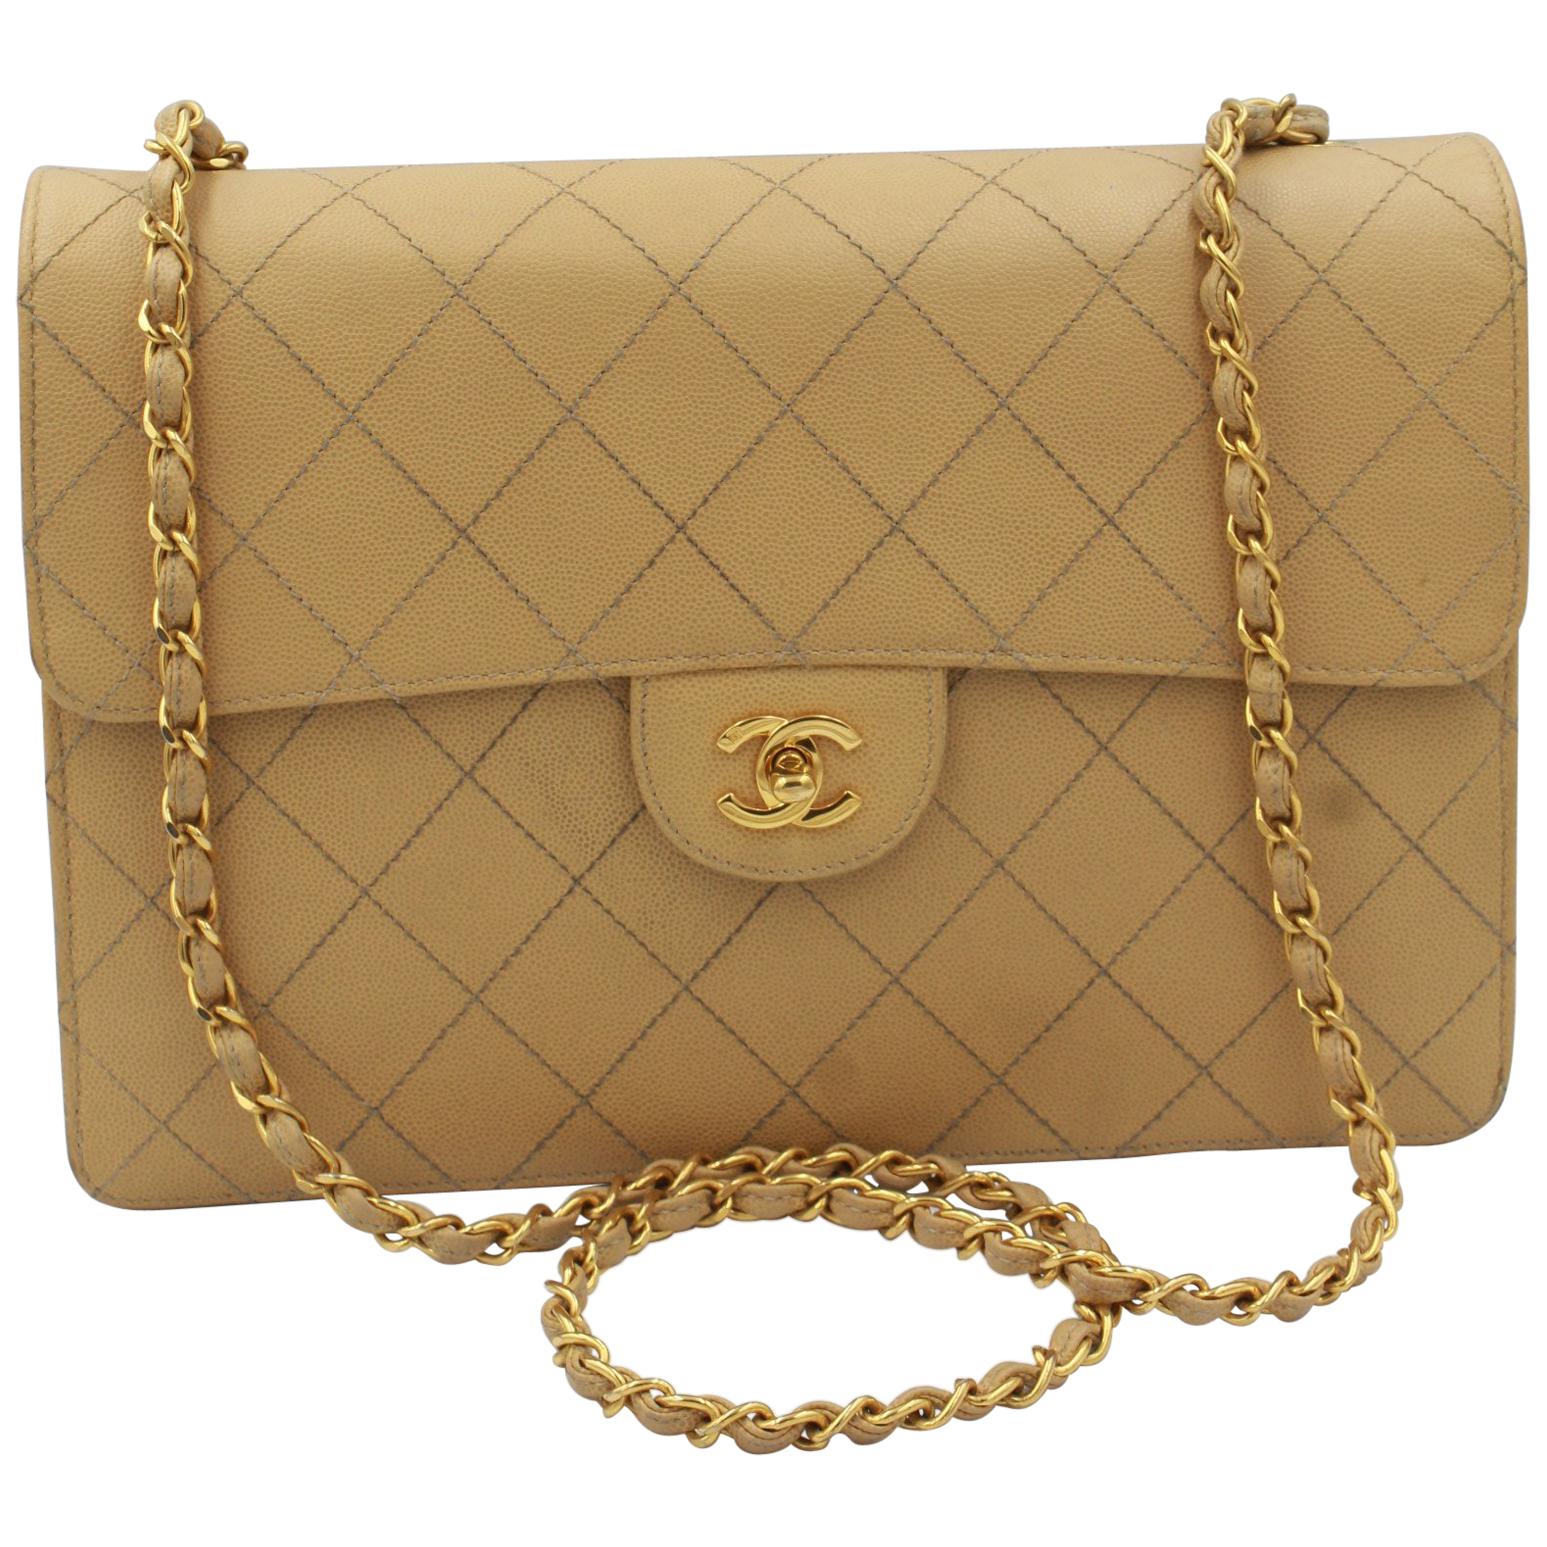 Vintage Chanel Timeless  Simple flap bag in grained leather